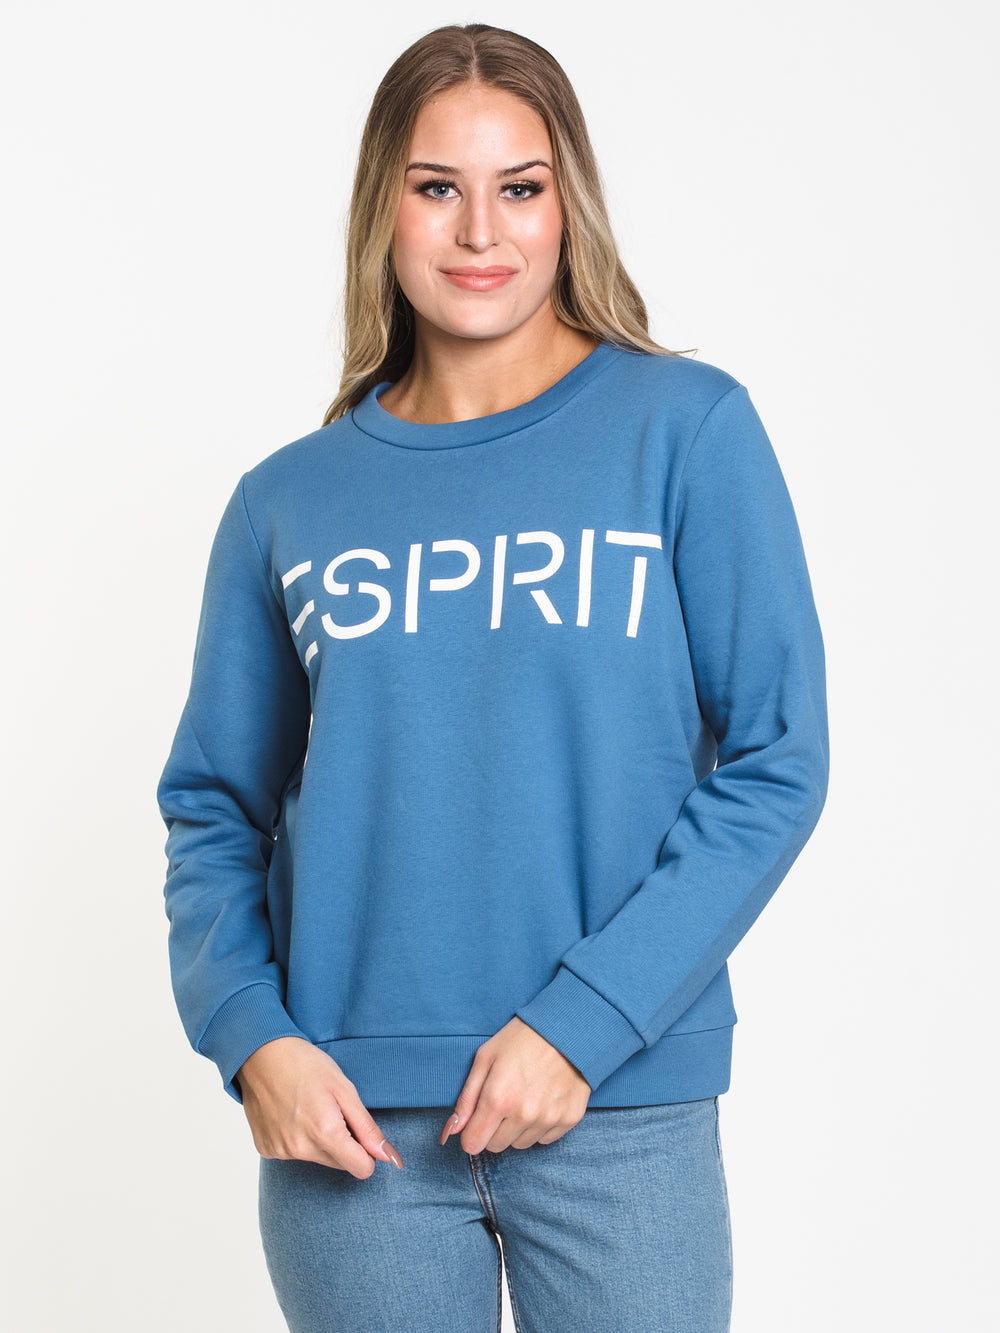 WOMENS VINTAGE CREW - BRIGHT BLUE - CLEARANCE